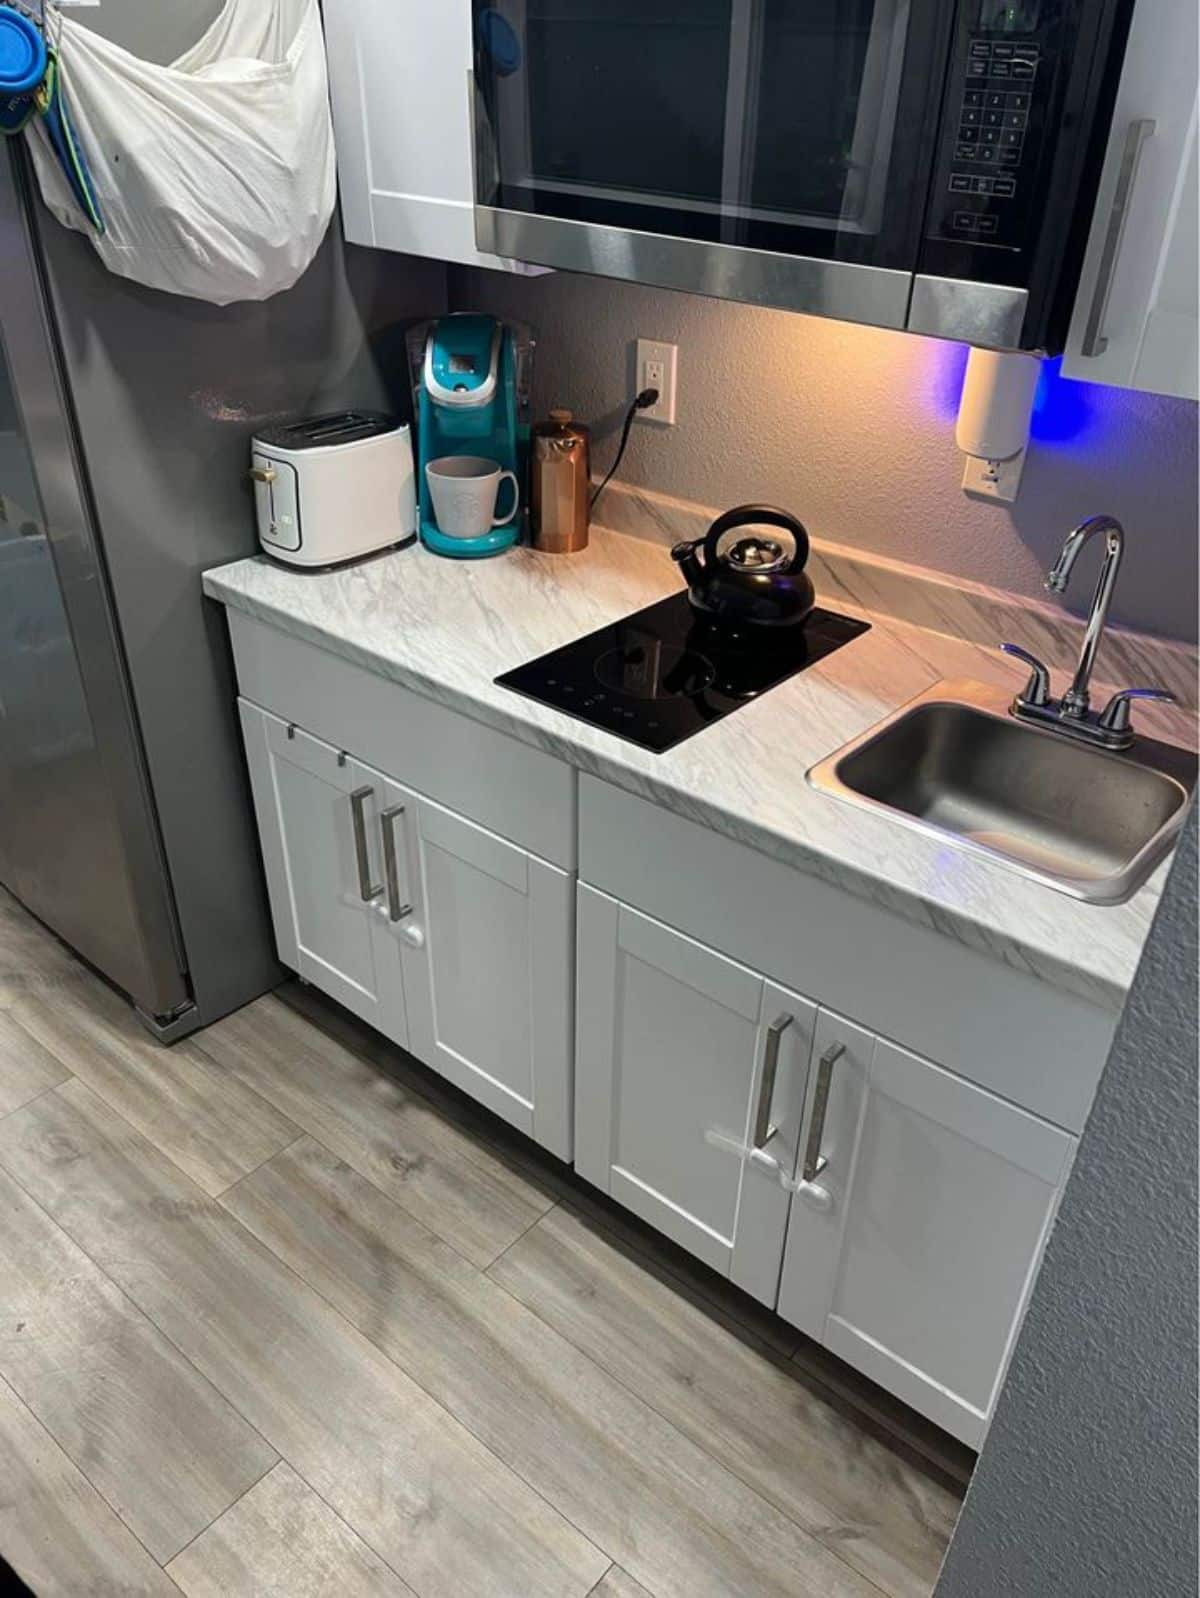 Kitchen area of 40-feet Container Tiny Home